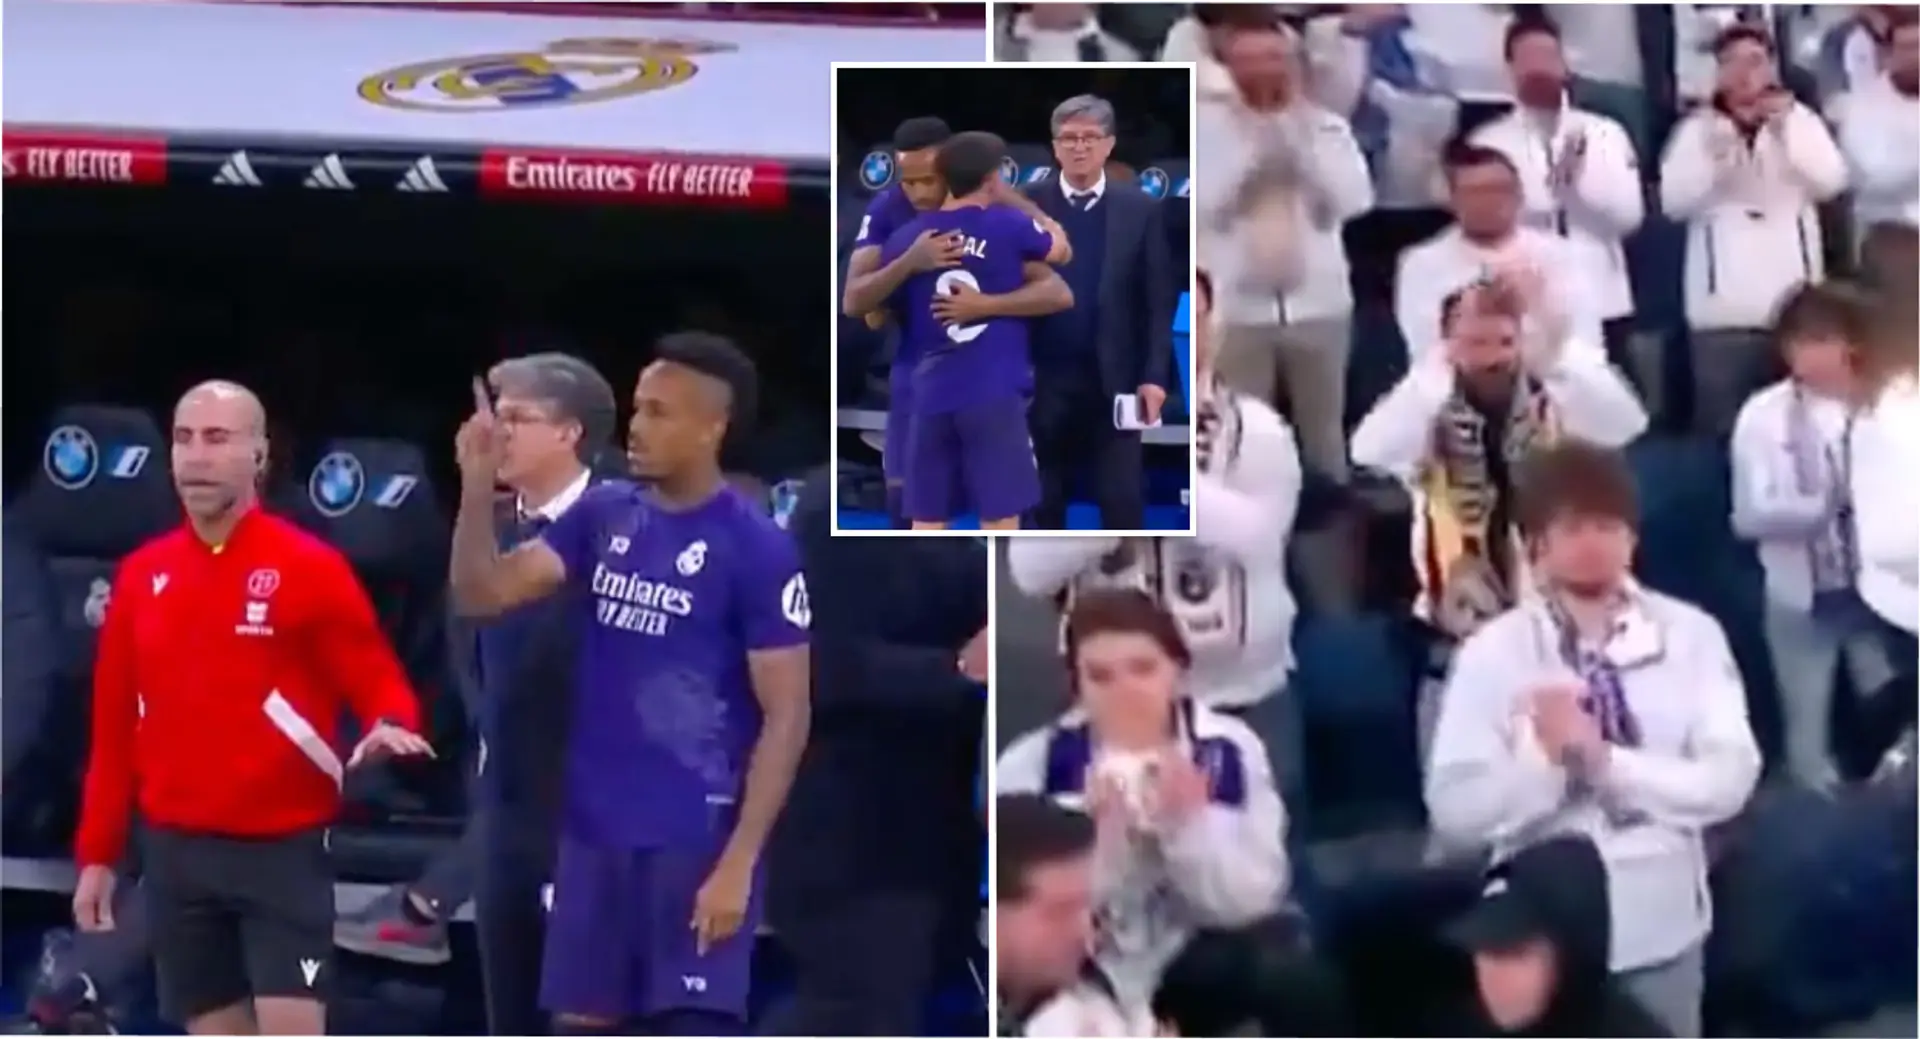 Standing ovation and forehead kisses: How Bernabeu welcomed Militao back after ACL injury